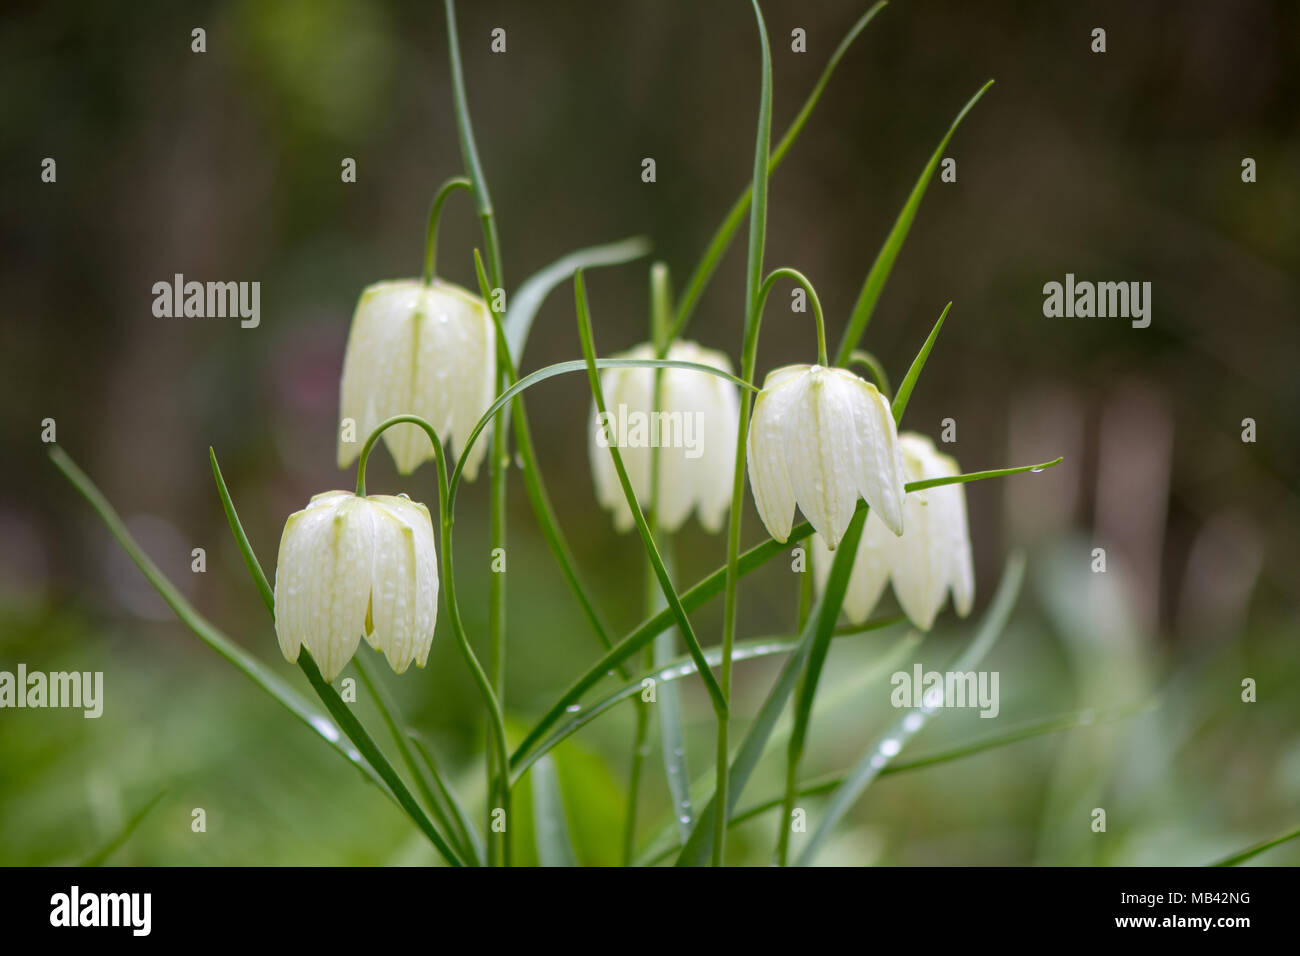 White-flowered snake's head fritillaries (Fritillaria meleagris). White bell-shaped flowers on Spring-flowering bulbs, in the family Liliaceae. Stock Photo